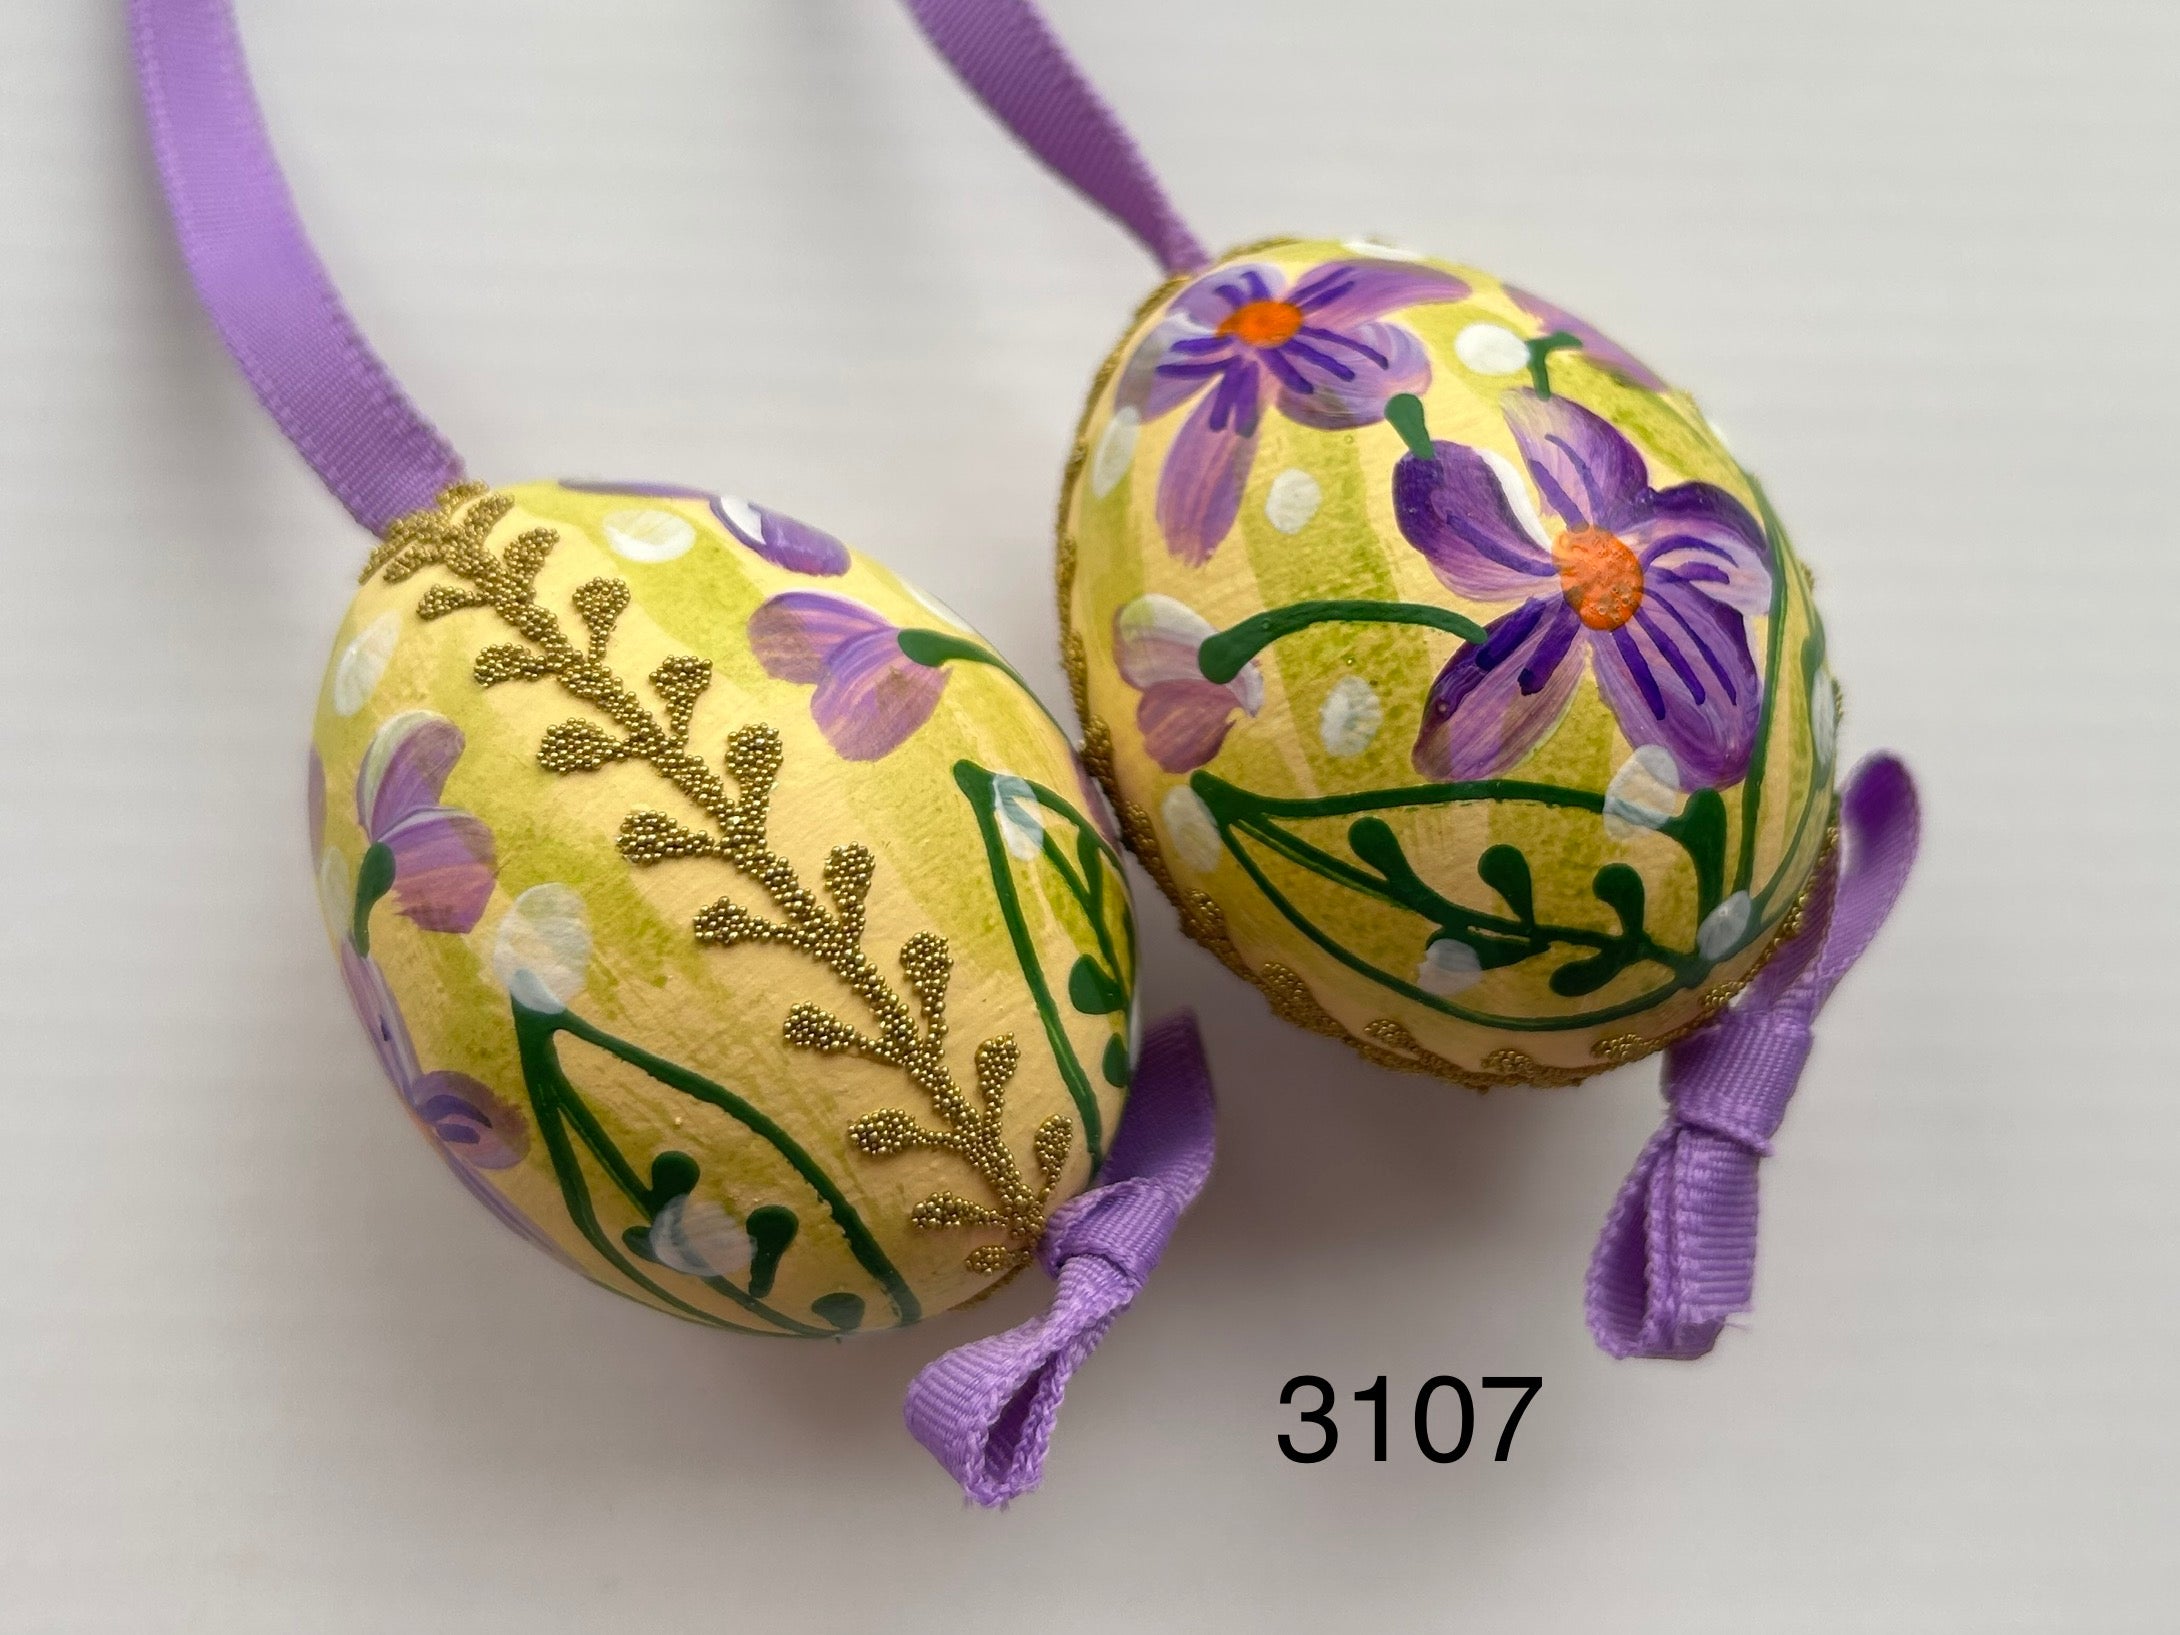 Peter's Hand Painted Egg from Austria 3107